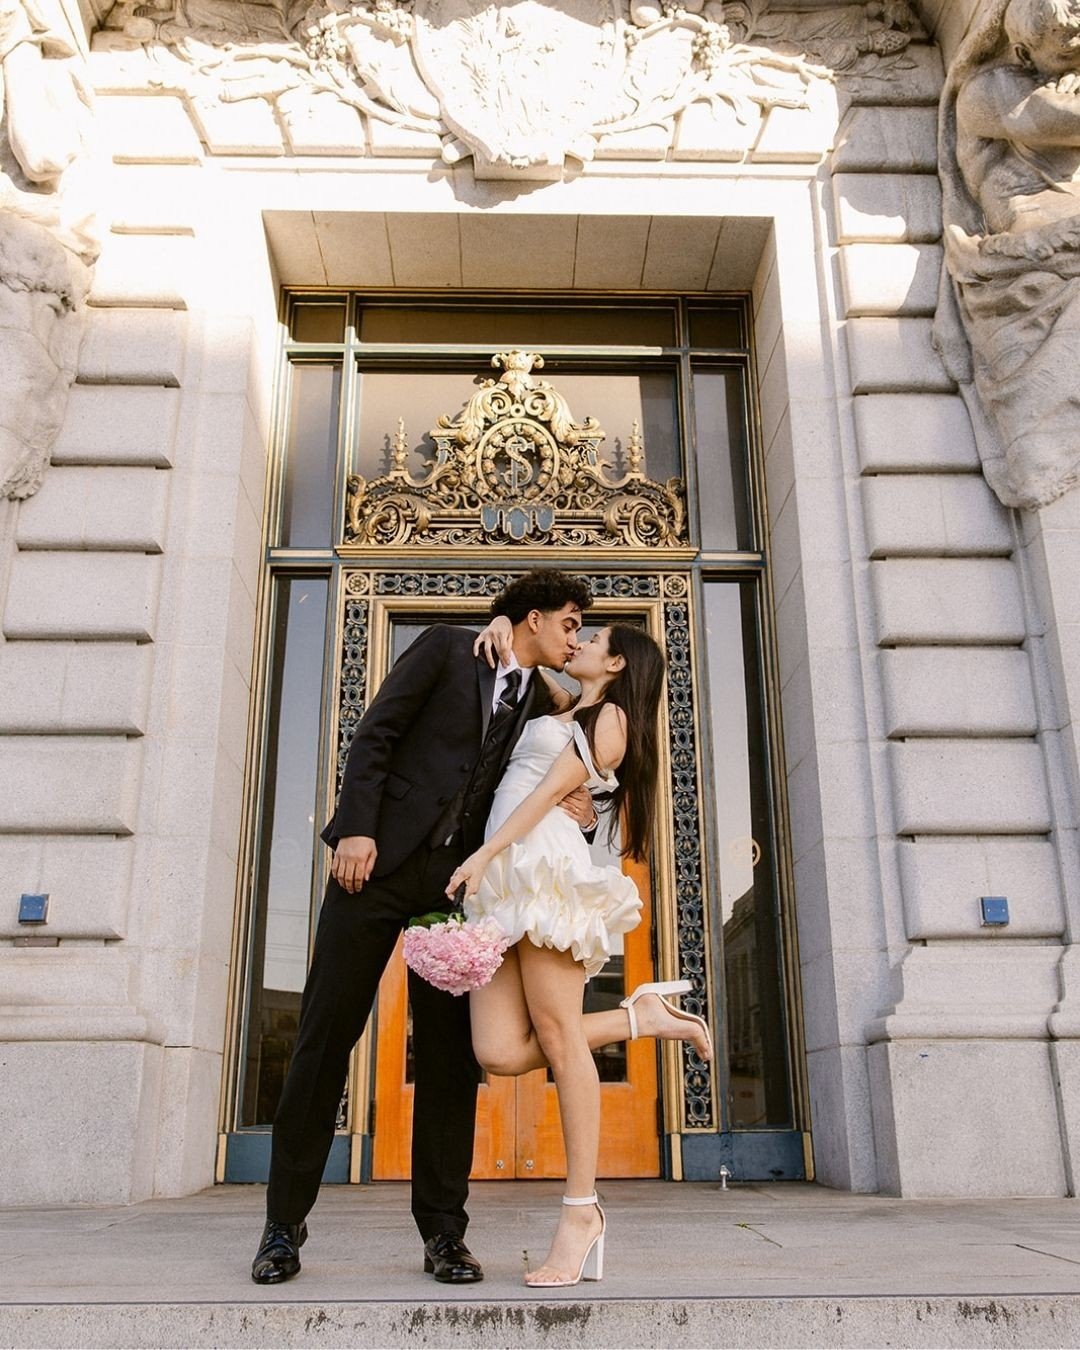 Radiant in ruffles ✨️⁠
⁠
Jessica + Angel stole the show during their City Hall elopement, and the short, stylish ruffles definitely kicked it up a notch!⁠
⁠
It's a dress I can't stop thinking about!⁠
⁠
What would your dream elopement dress look like?